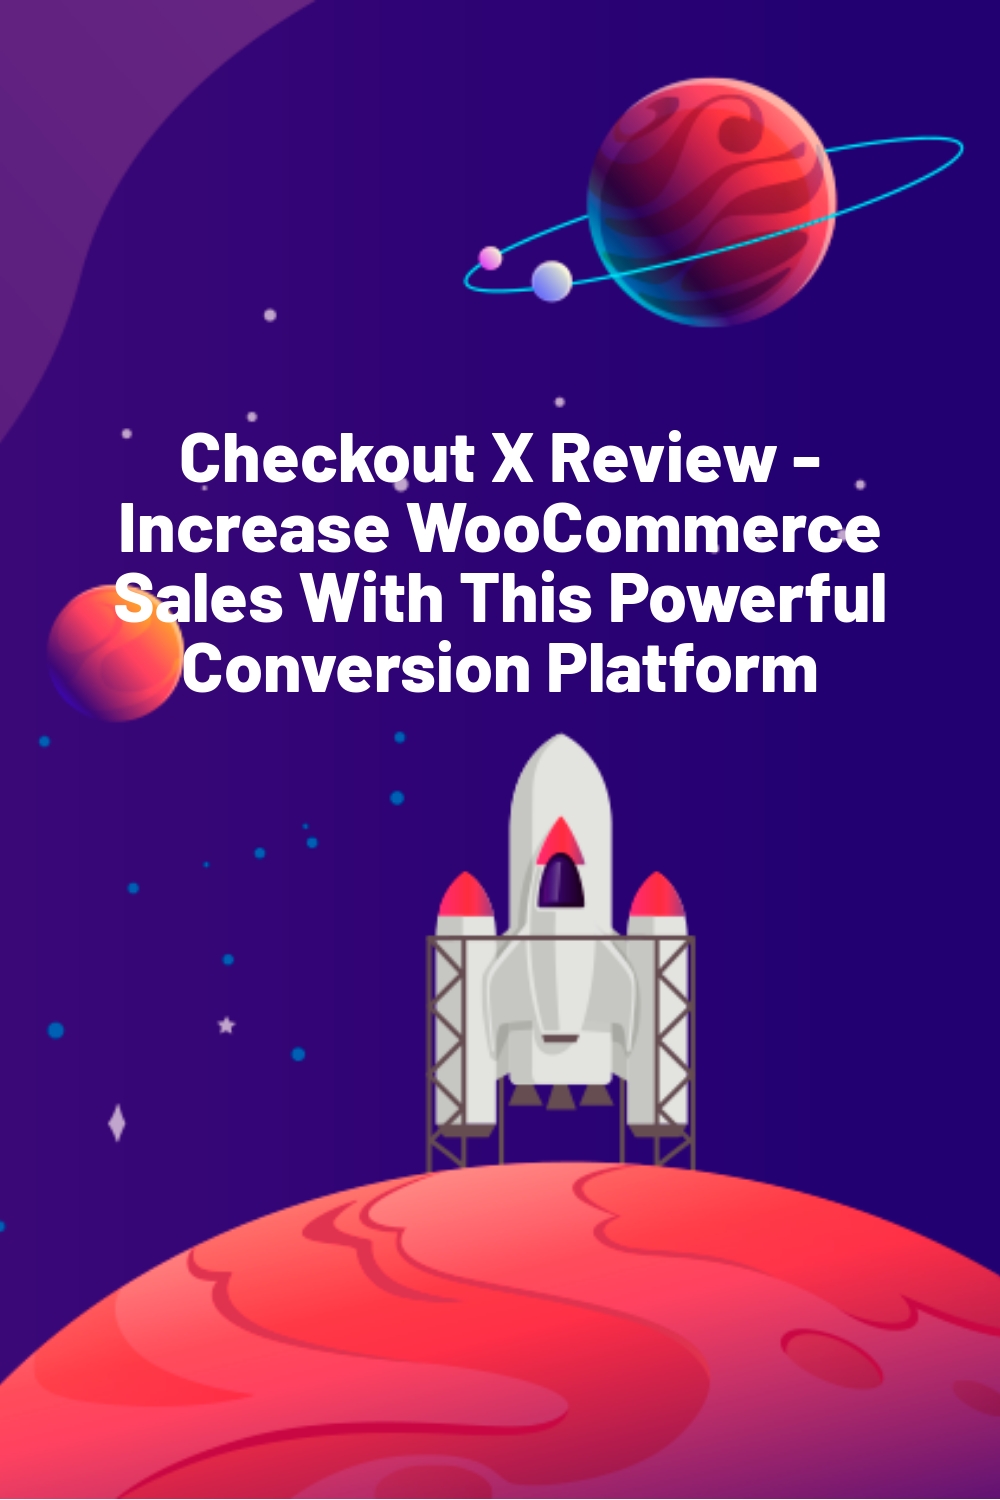 Checkout X Review – Increase WooCommerce Sales With This Powerful Conversion Platform